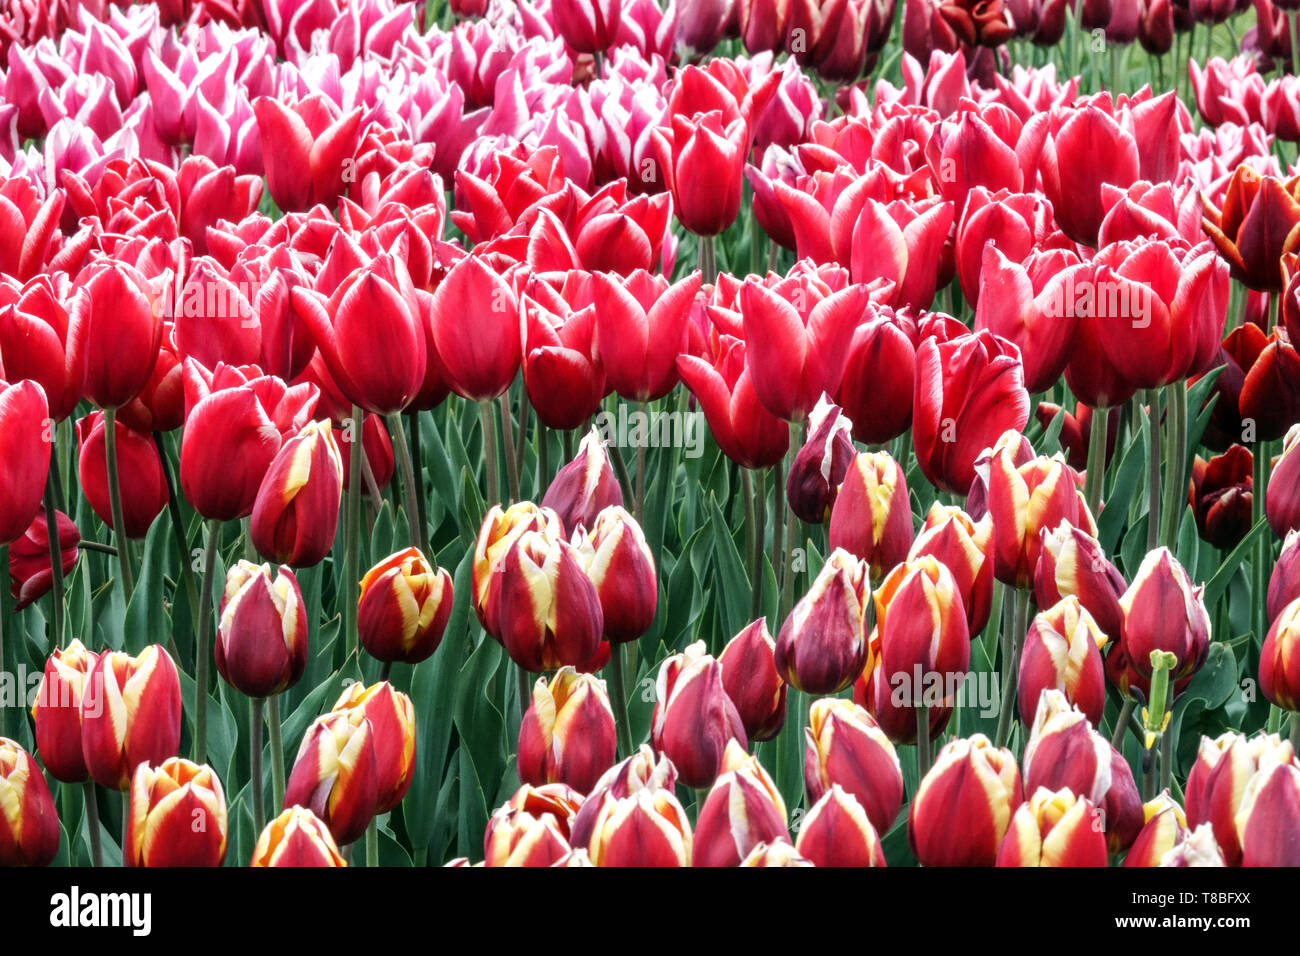 Mixed tulips flower beds colorful spring Red Tulips garden flowers Stock Photo